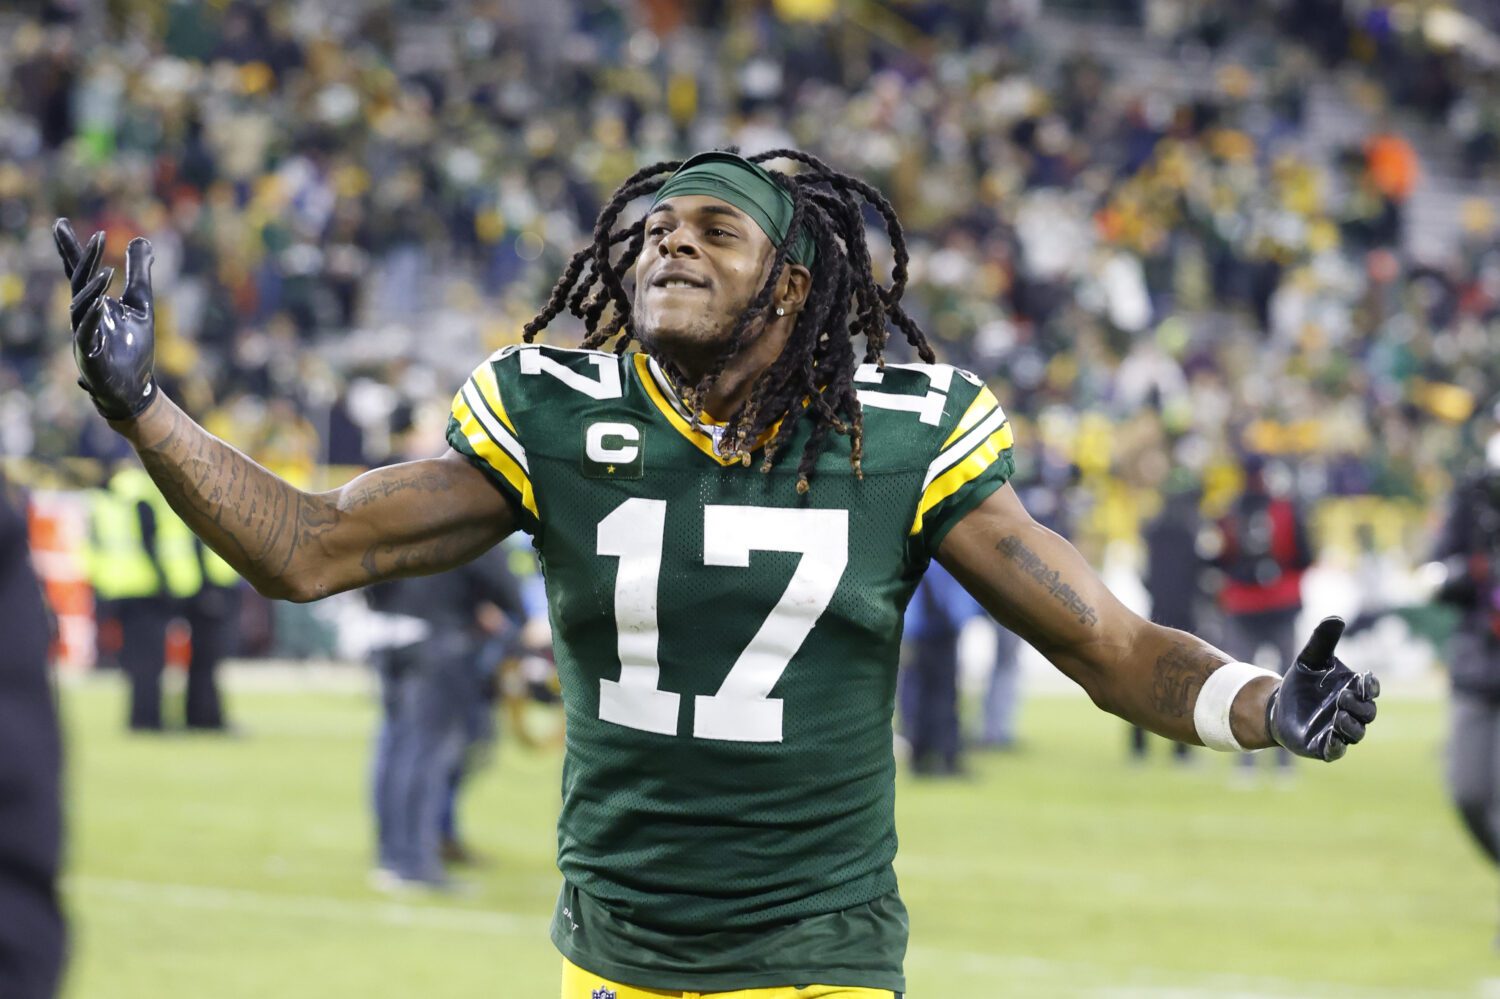 Packers Rumors: Davante Adams Expected to Get Franchise Tag amid Aaron Rodgers Buzz